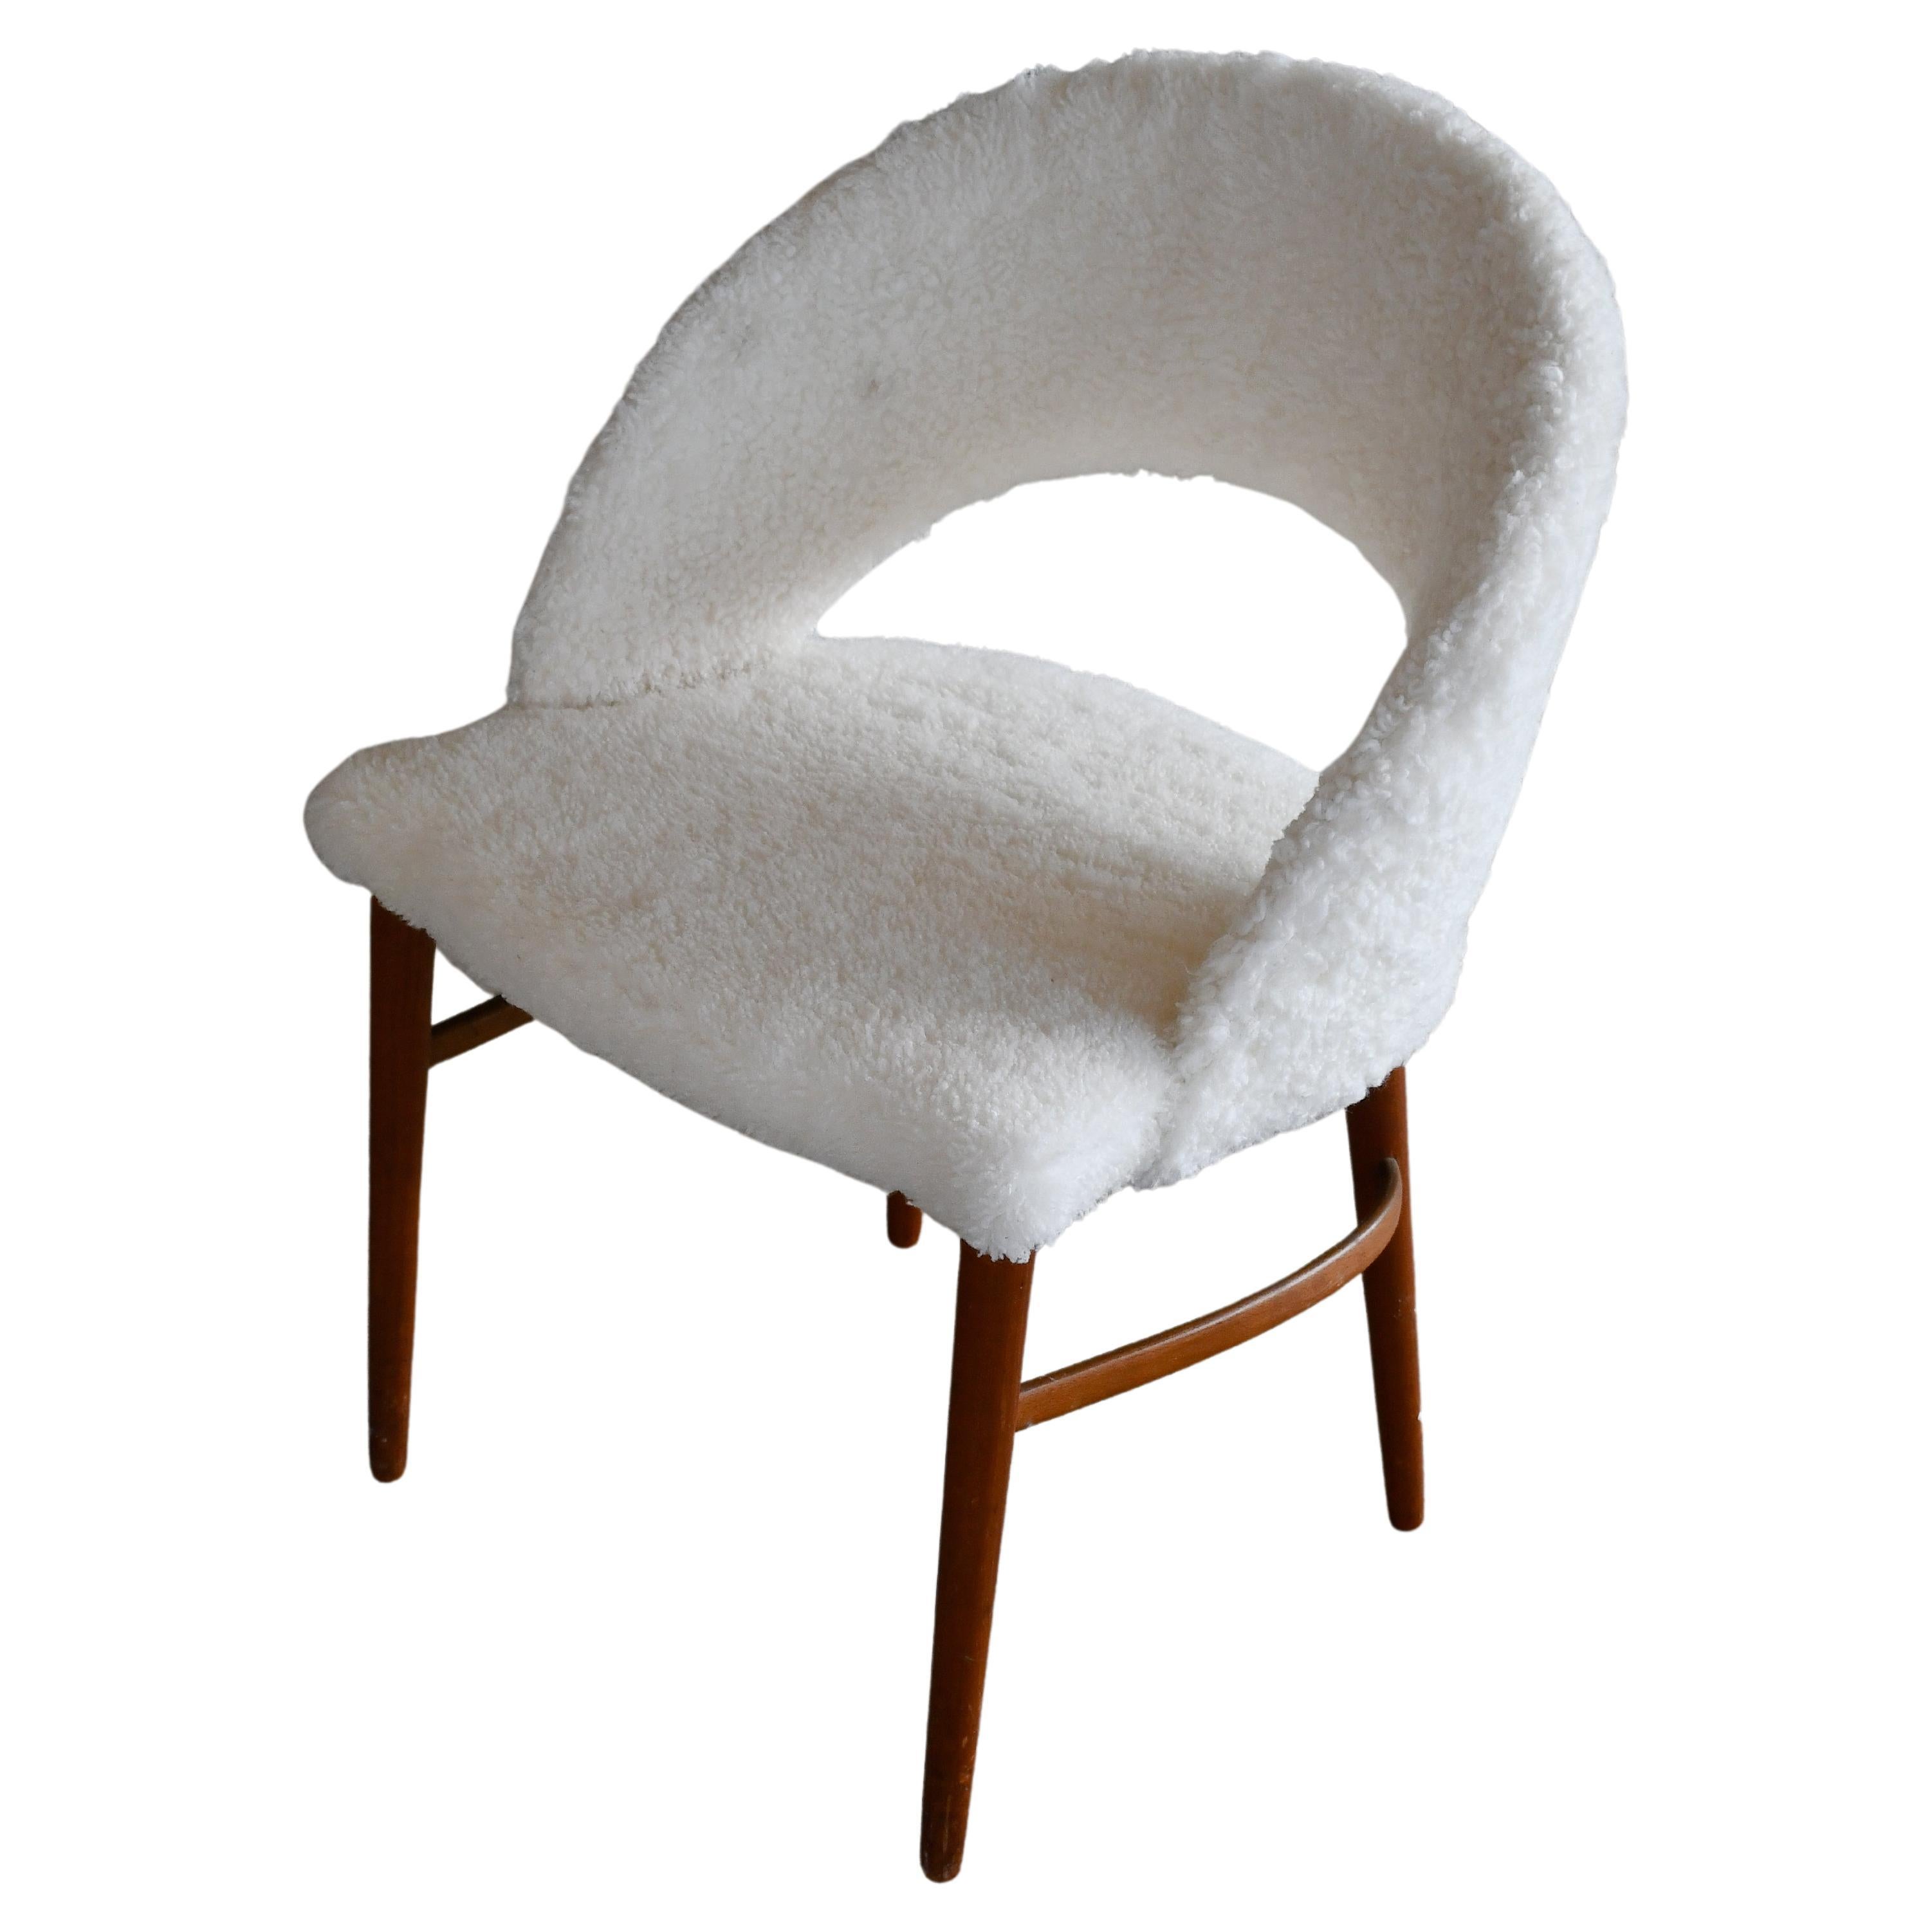 Frode Holm Vanity or Dressing Chair in Teak and sheepskin, Denmark, 1950s For Sale